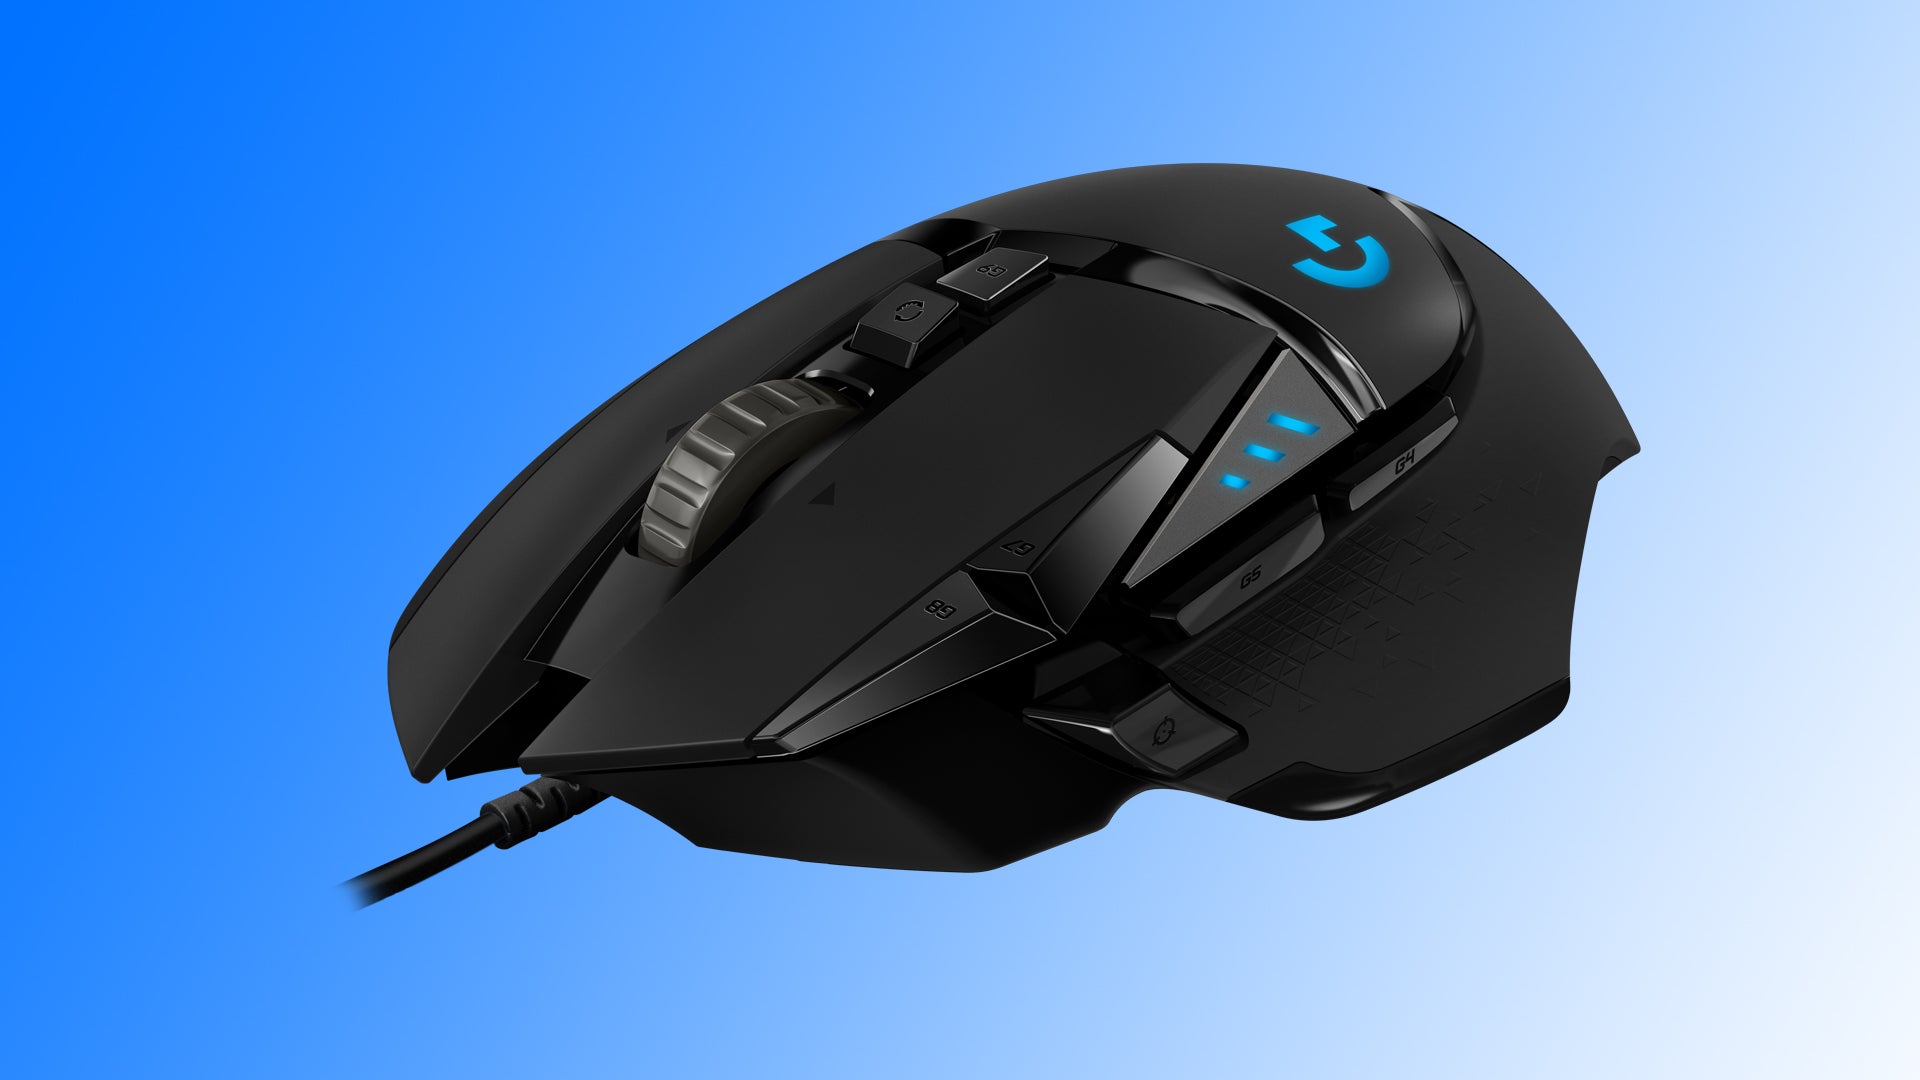 Image of a Logitech G502 Hero mouse on a blue to white gradient background.